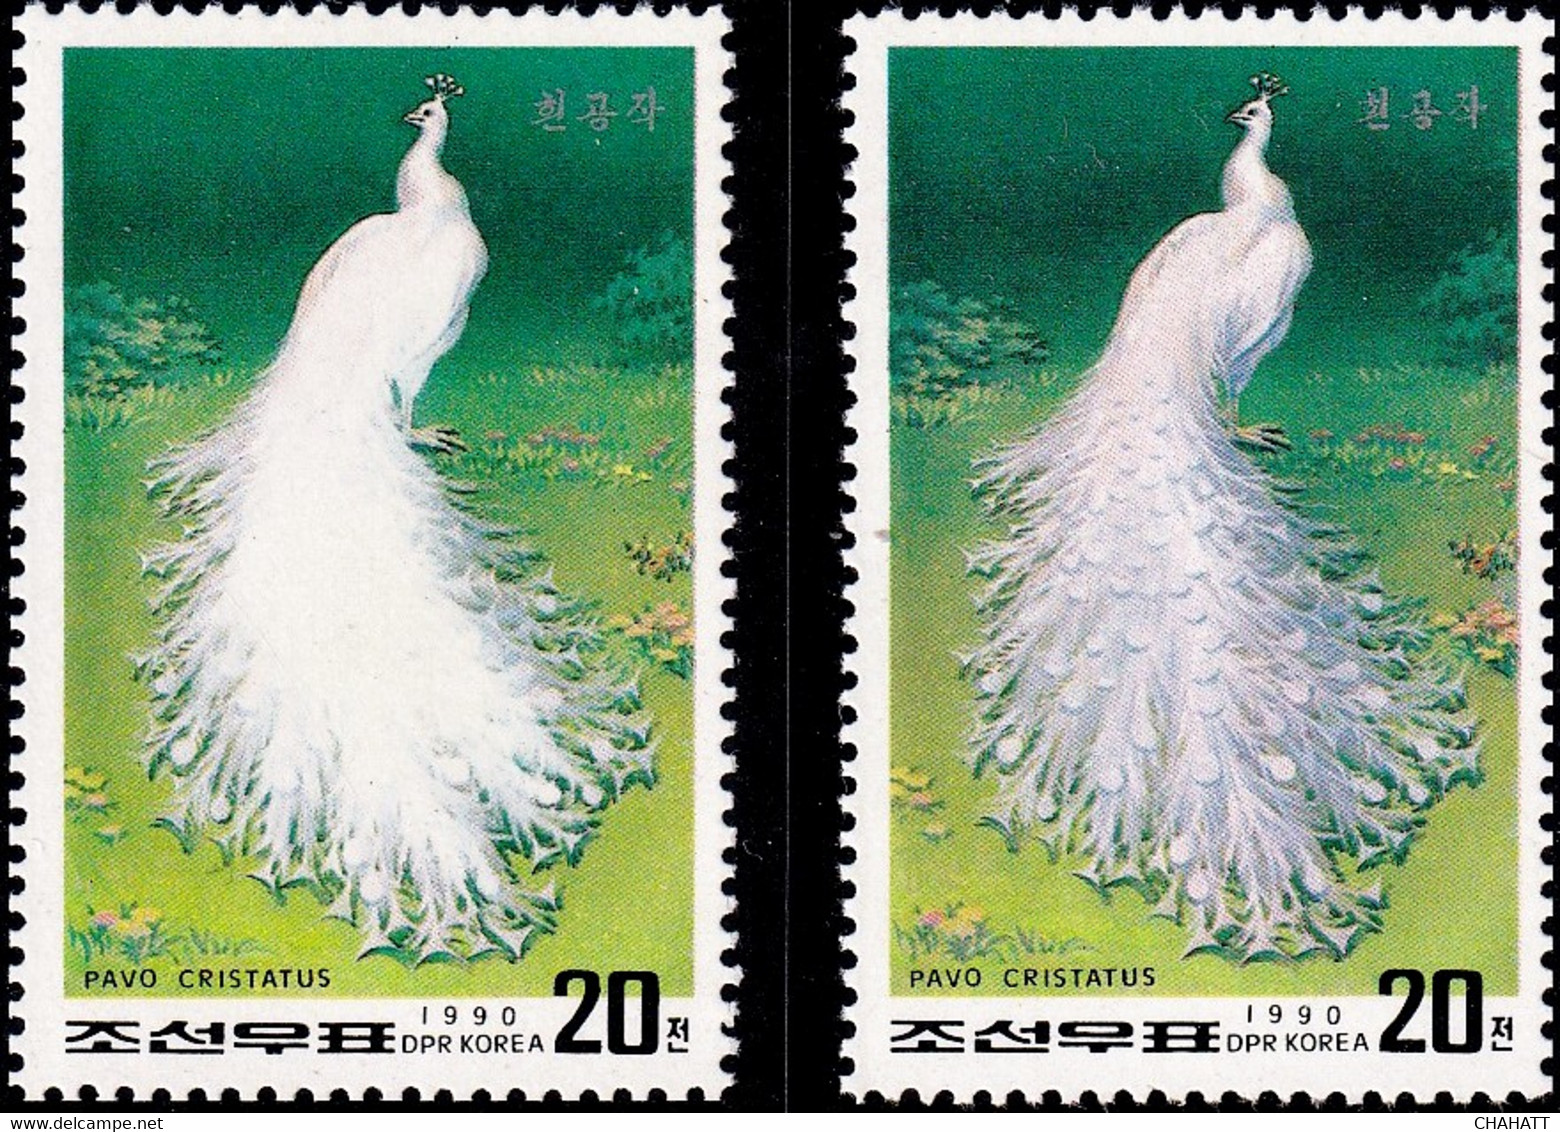 WHITE PEACOCK- PHEASANTS-ERROR WITH NORMAL -EYELETS MISSING- KOREA- 1990-EXTREMELY SCARCE- MNH-BR4-16 - Peacocks